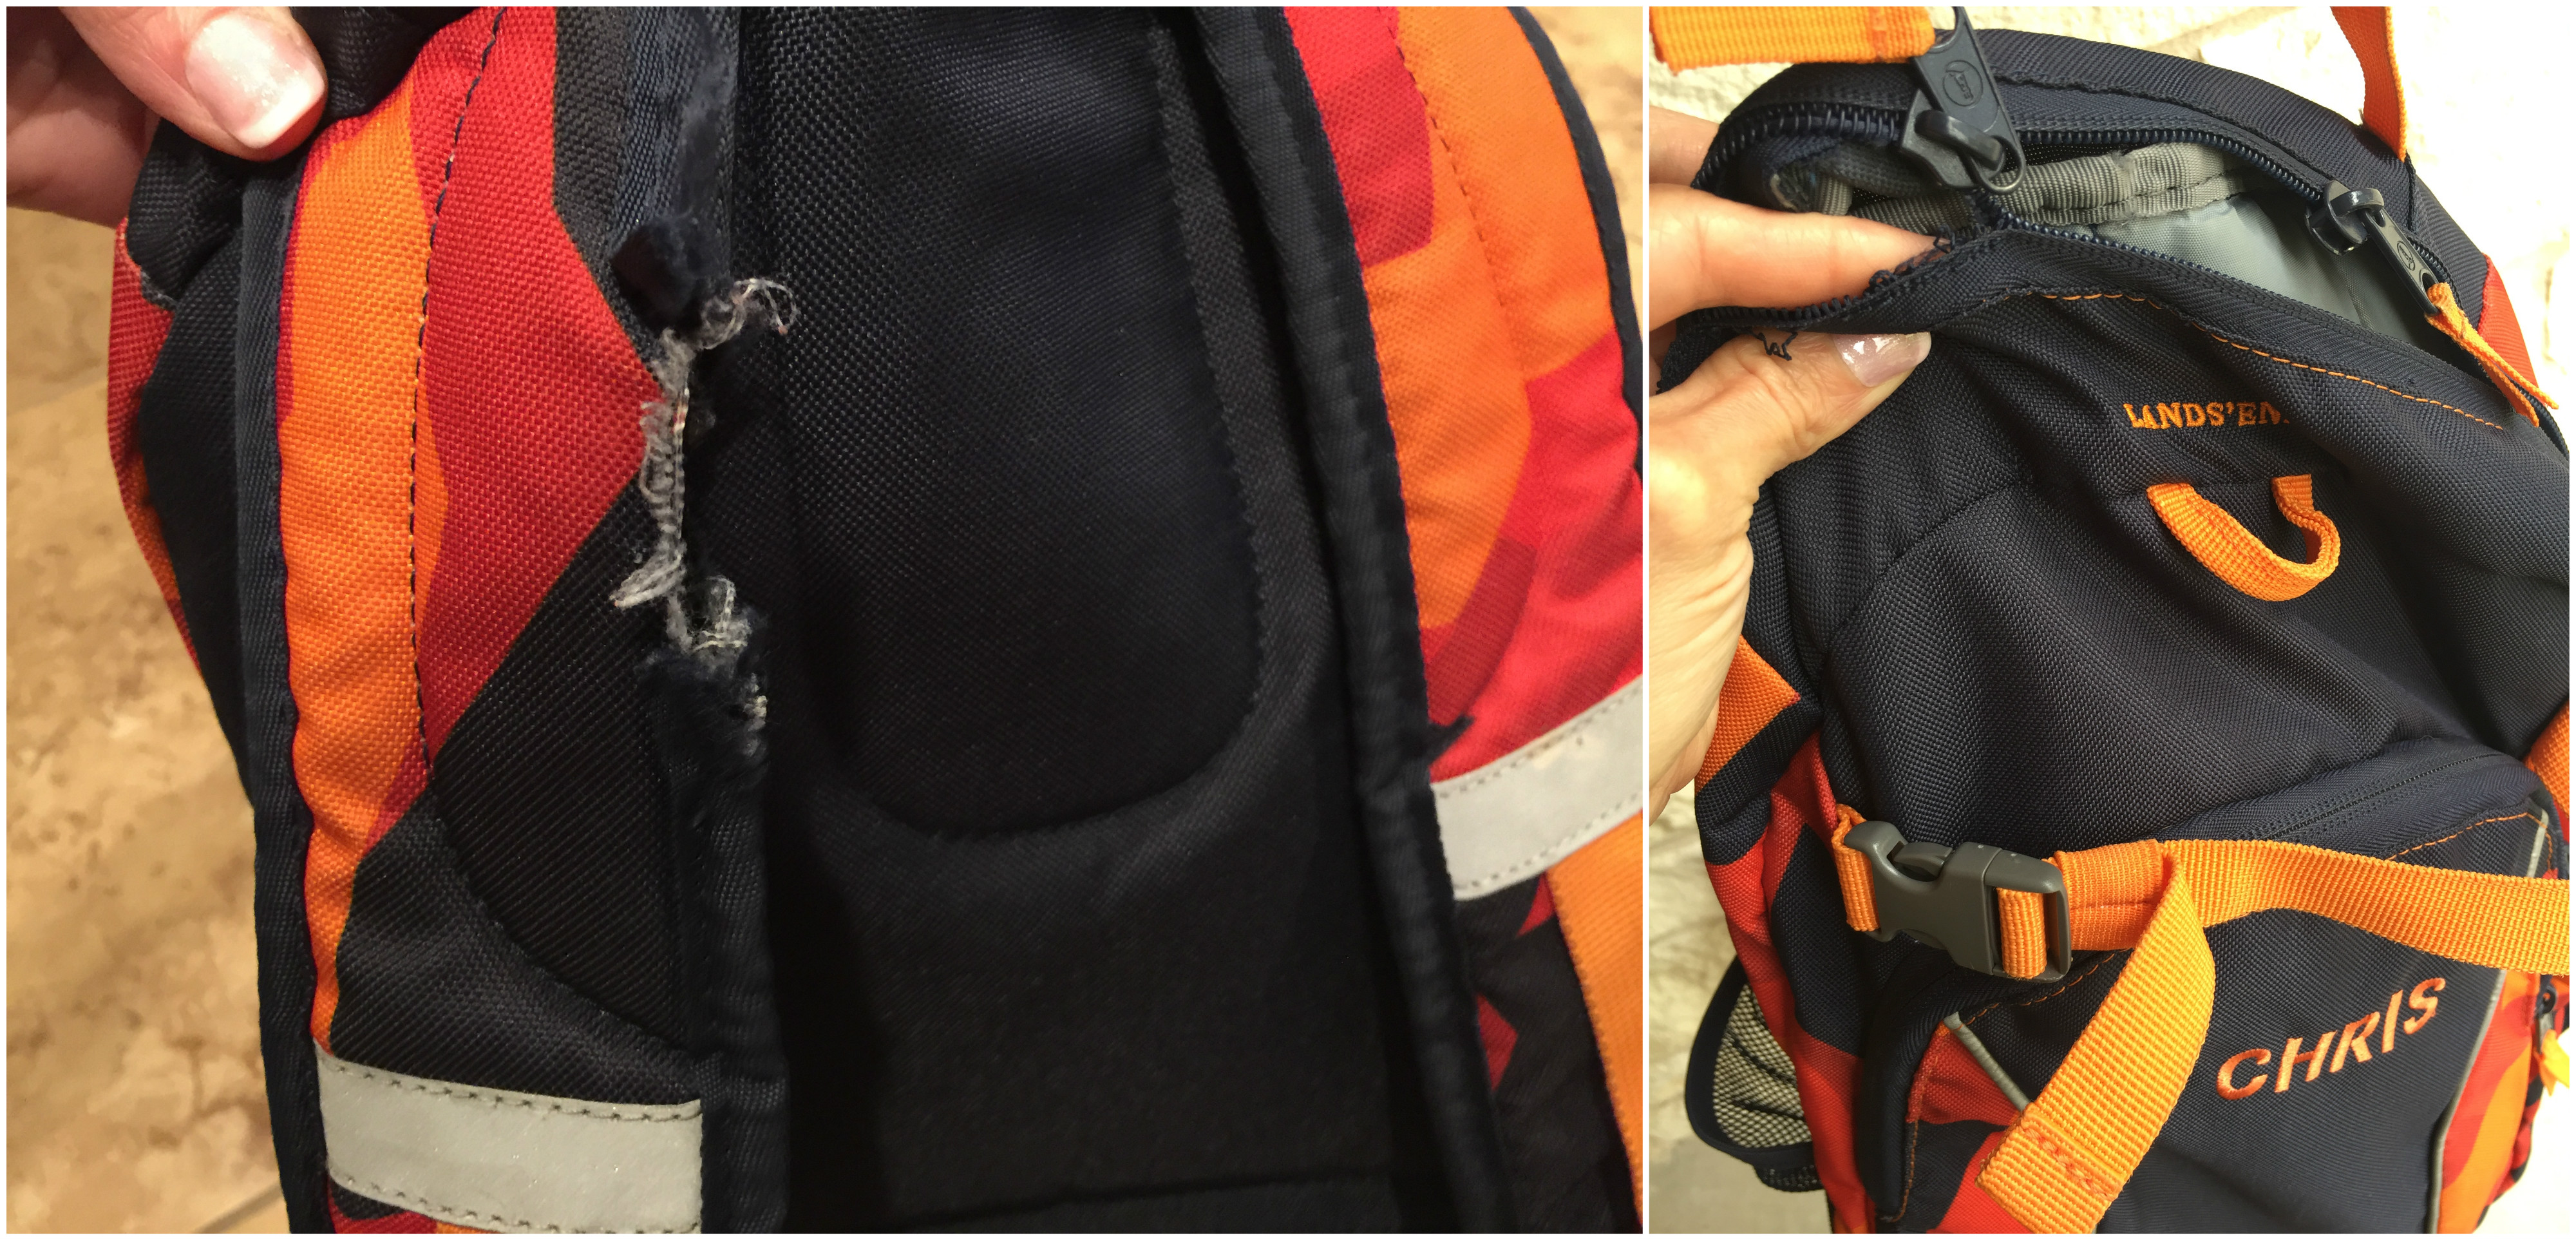 Have Broken Lands' End Backpacks or Lunch Boxes? Don't Throw Them Away! - Hip2Save4000 x 1925